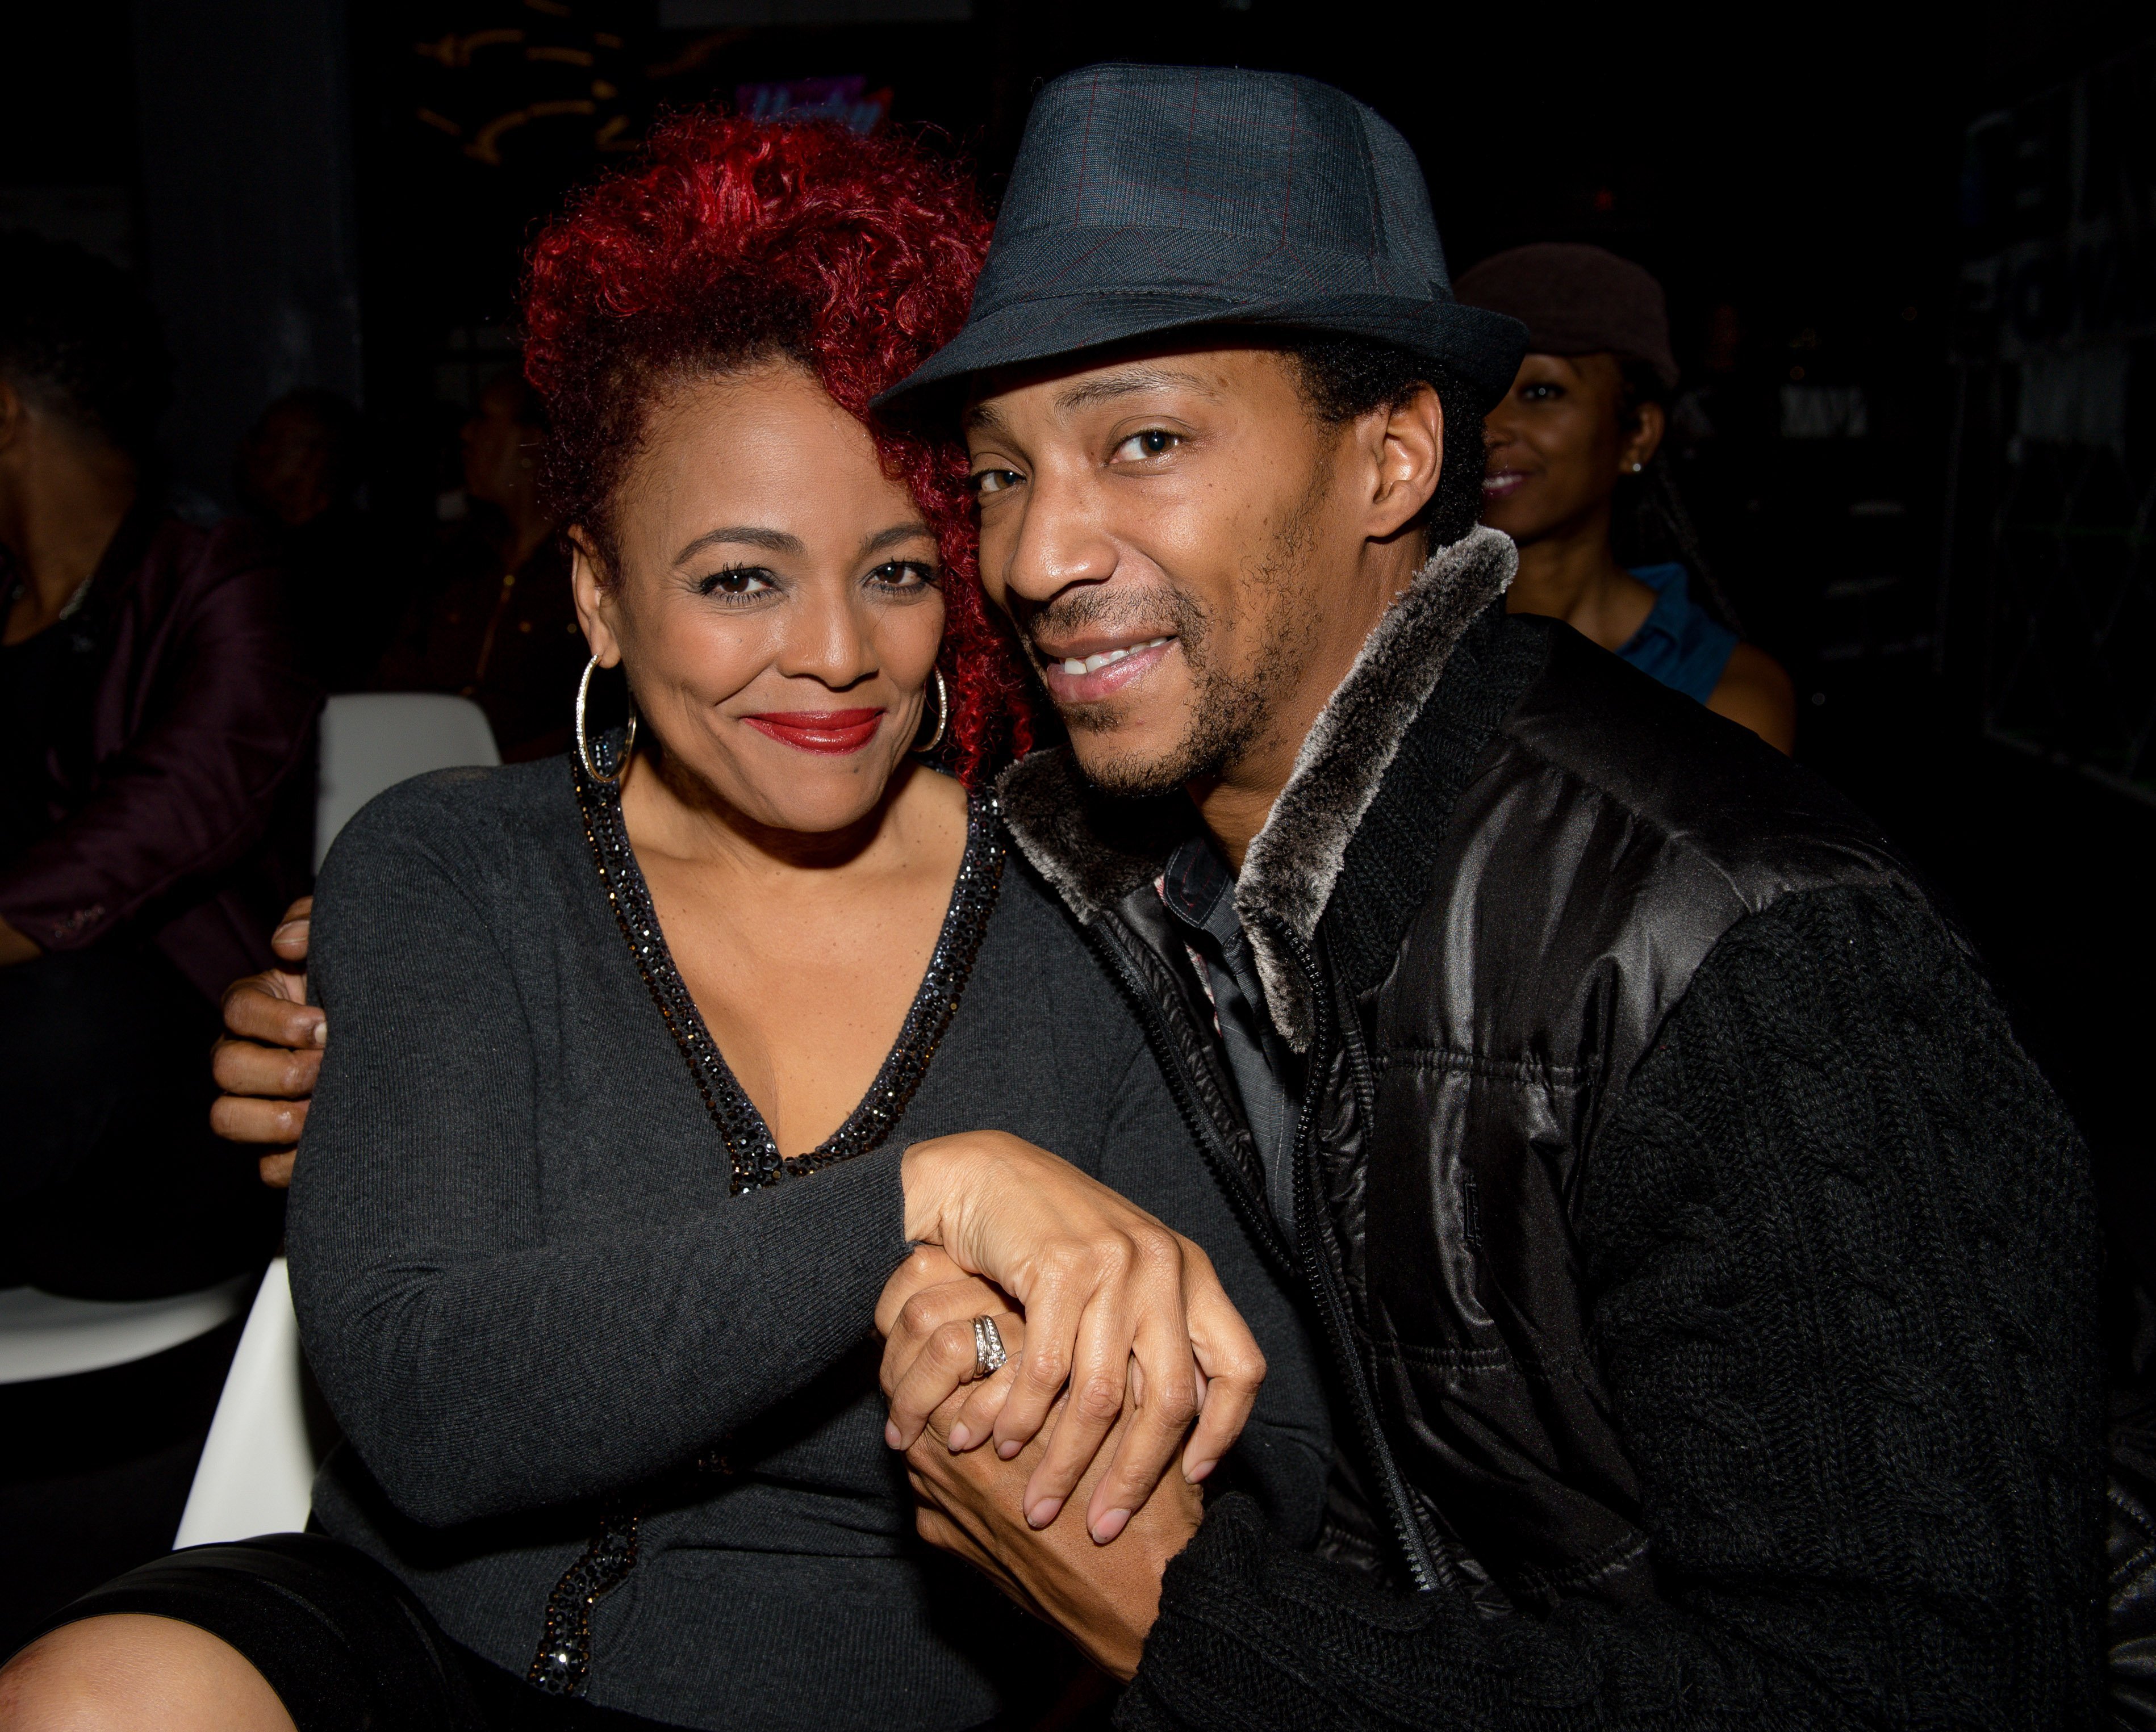 Kim Fields & Christopher Morgan at the "Happily After All" Book Release Celebration on Feb. 16, 2017 in Georgia | Photo: Getty Images